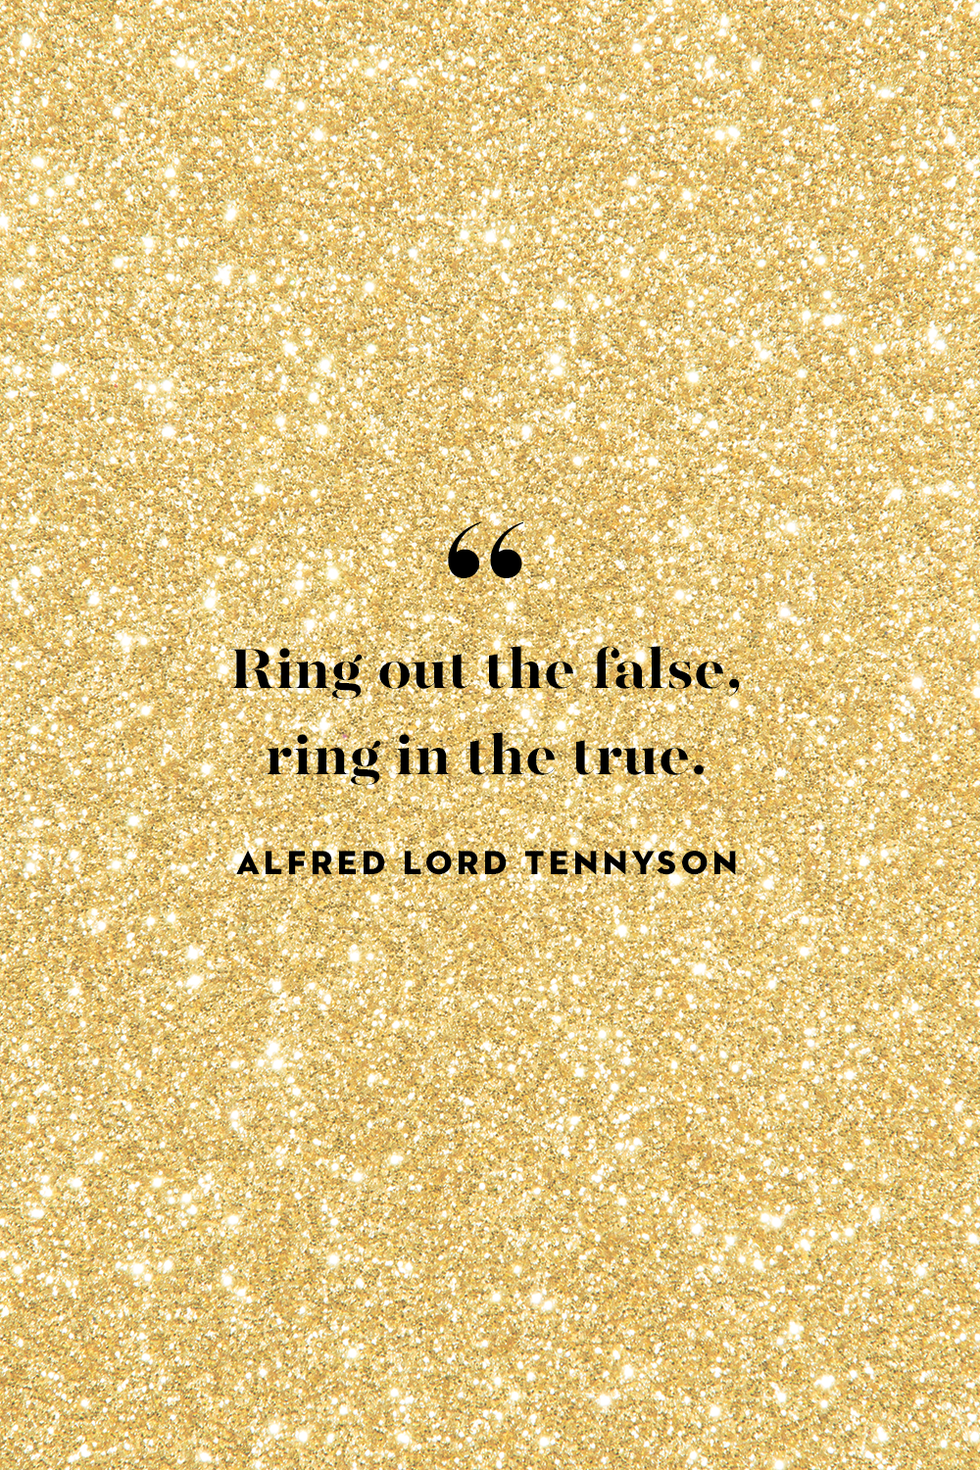 new year quote by alfred lord tennyson